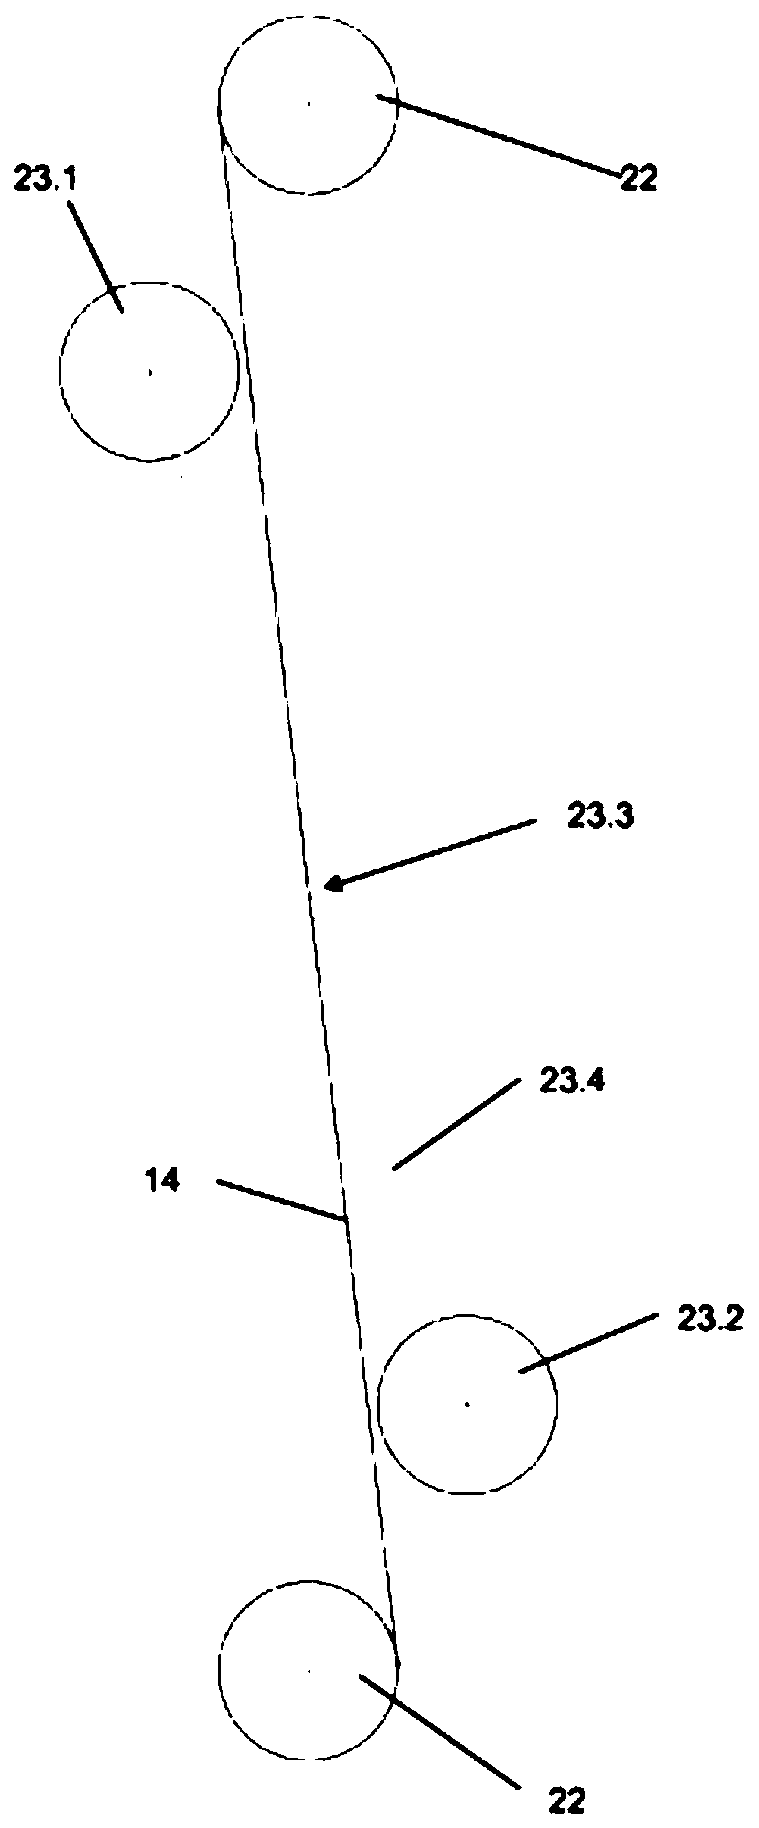 Floating roller for a packaging machine and method for threading a sheet web thereon